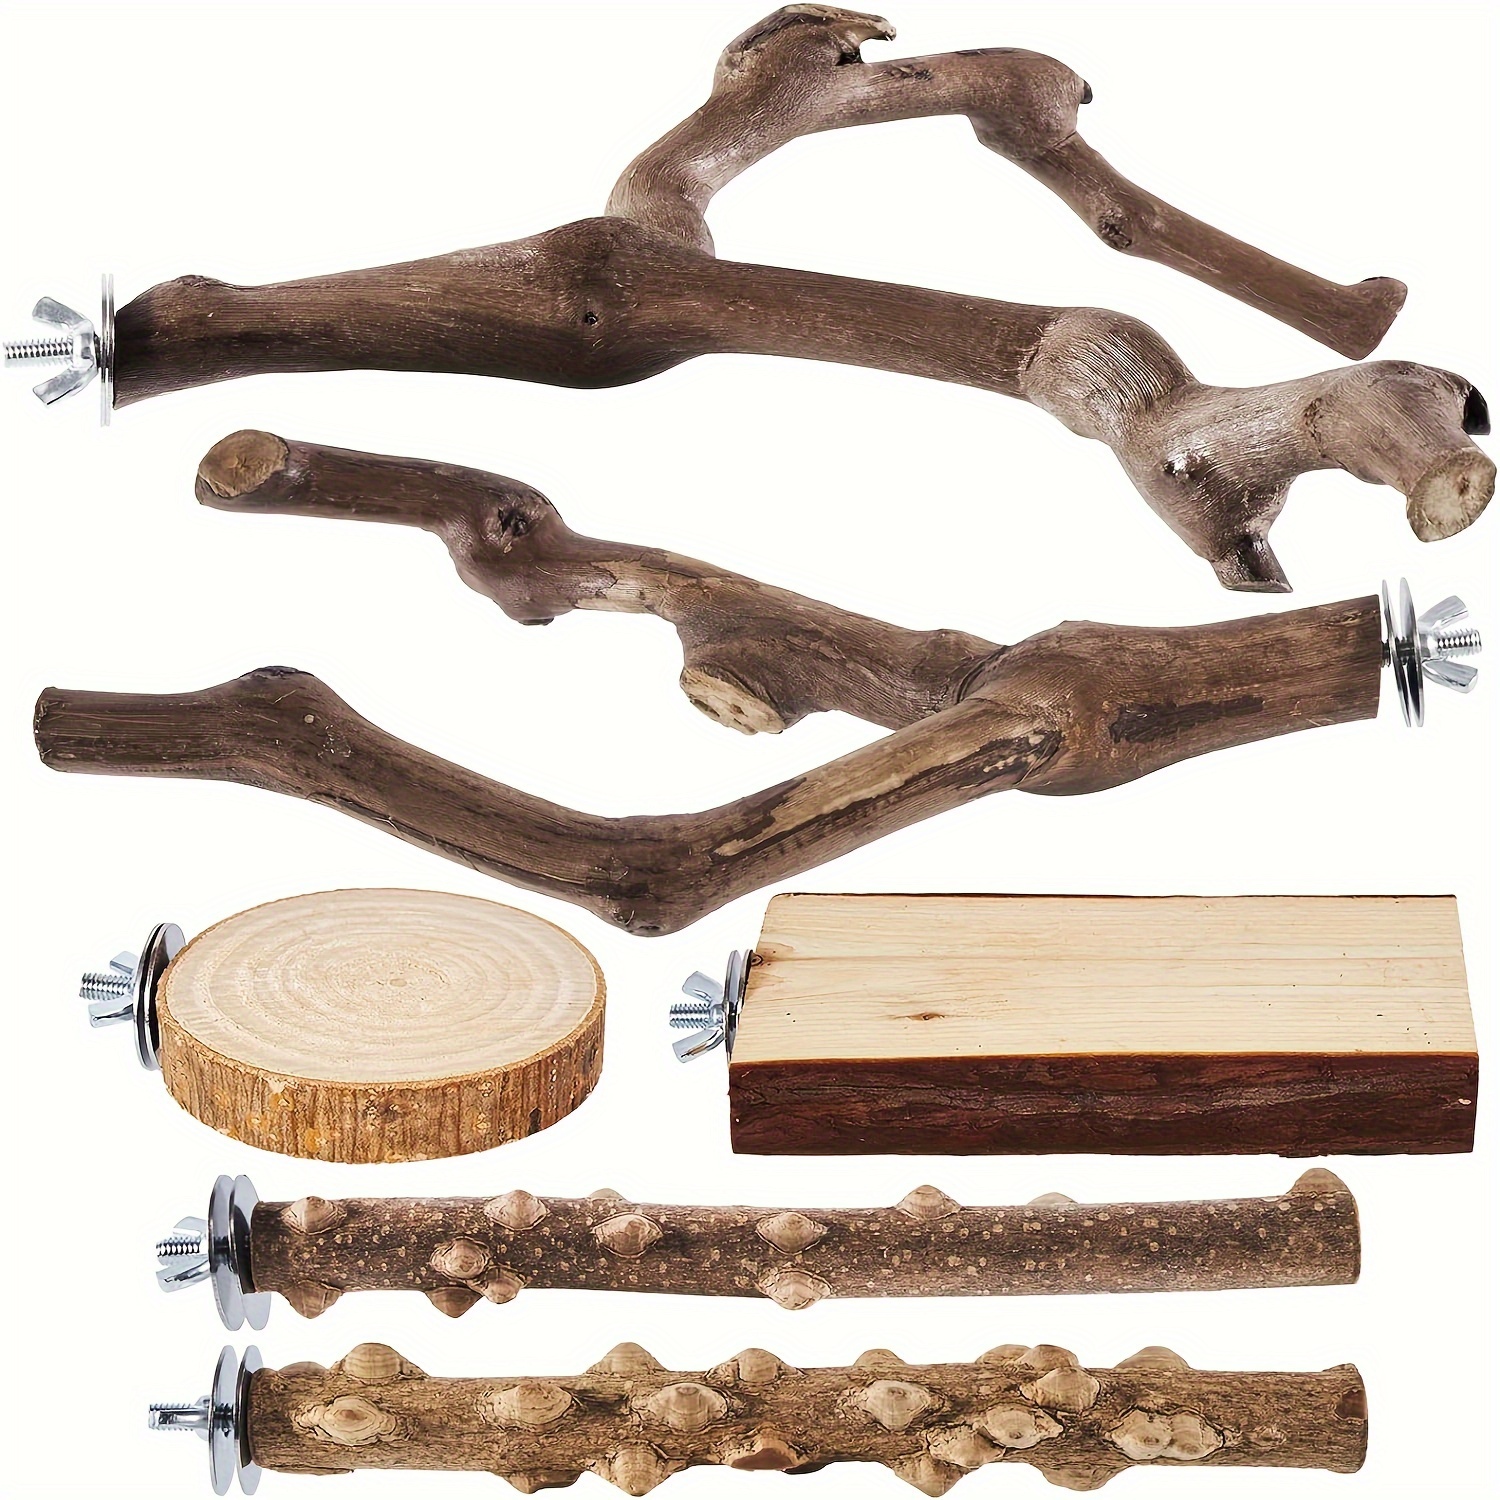 

6pcs Natural Tree Branch Perches For Birds, Suitable For Small And Medium-sized Parrots, Accessories For Bird Cages